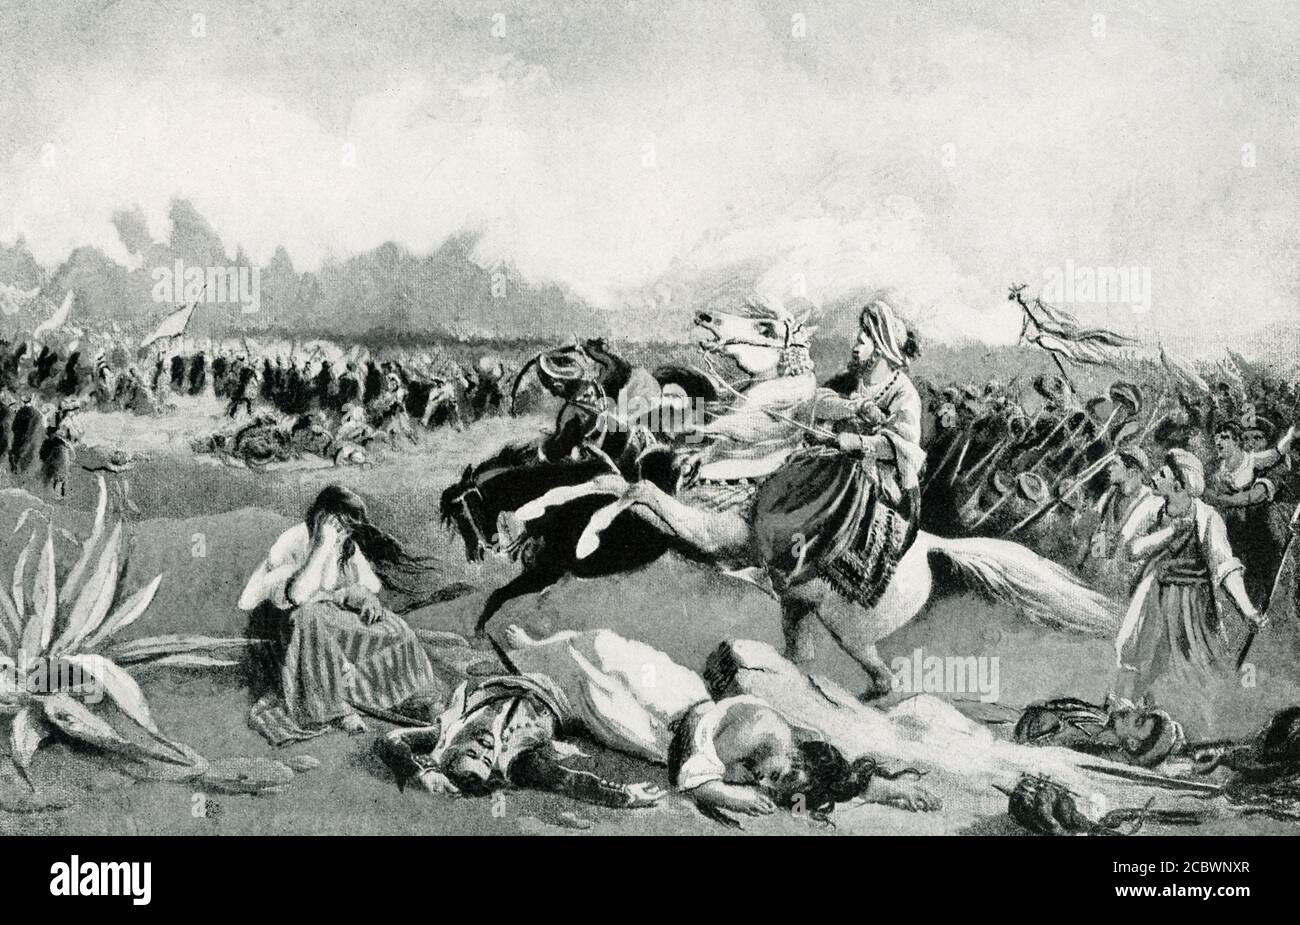 The caption for this illustrations dating to around 1900 reads: Final Assault and Massacre at Missolonghi. This occurred in 1826, during the Greek war of independence. The people of Missolonghi withstood a siege of twelve months. They were reduced to eating rats, hides, and sea-weed. Finally, sooner than surrender, the men made a desperate night attack on the Turks, and such of the women and children, as were able rushed out of the city behind them. Many cut their way through their foes and escaped. The remnant, bewildered in the confusion and uproar, fell back into the city, the Turks enterin Stock Photo